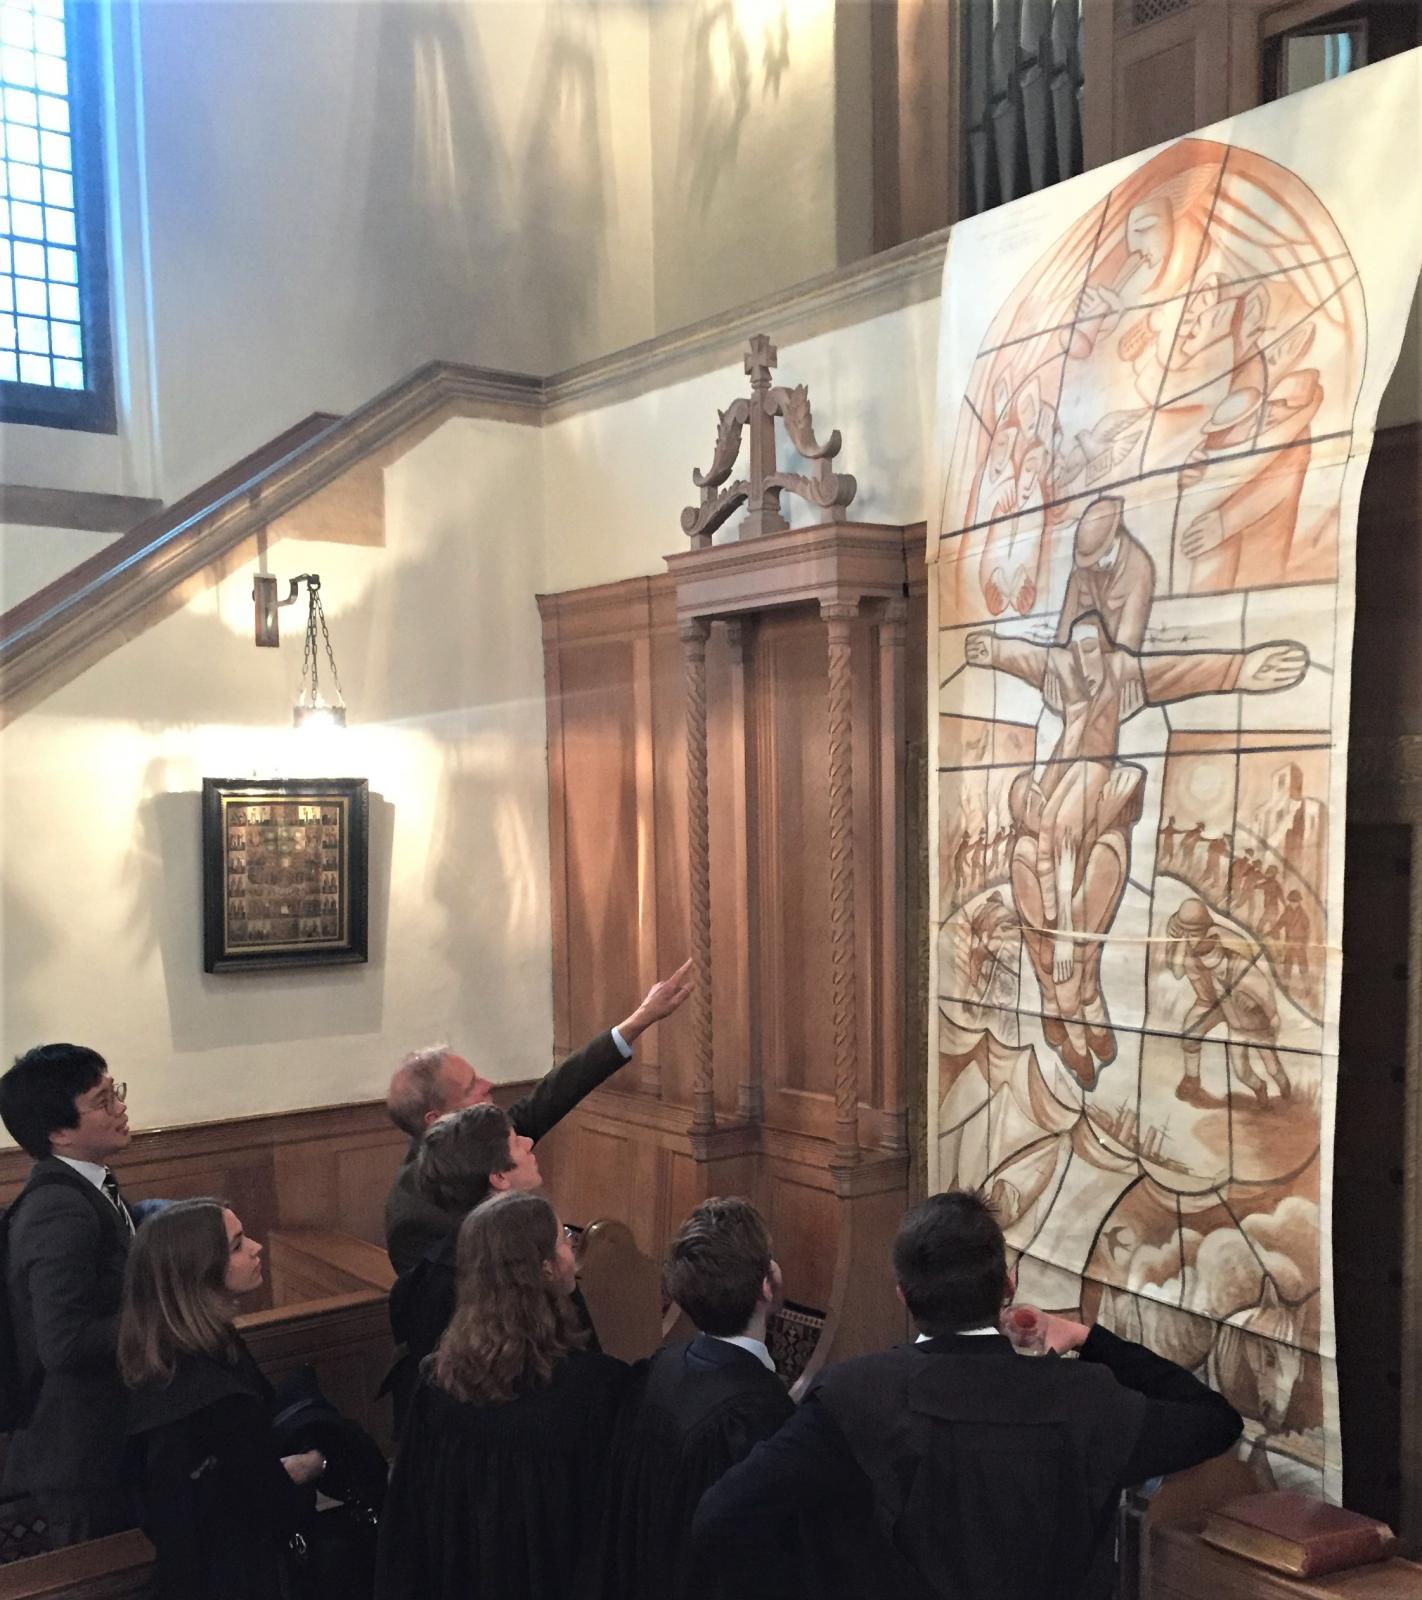 Nicholas Mynheer shows LMH students his painting in Chapel